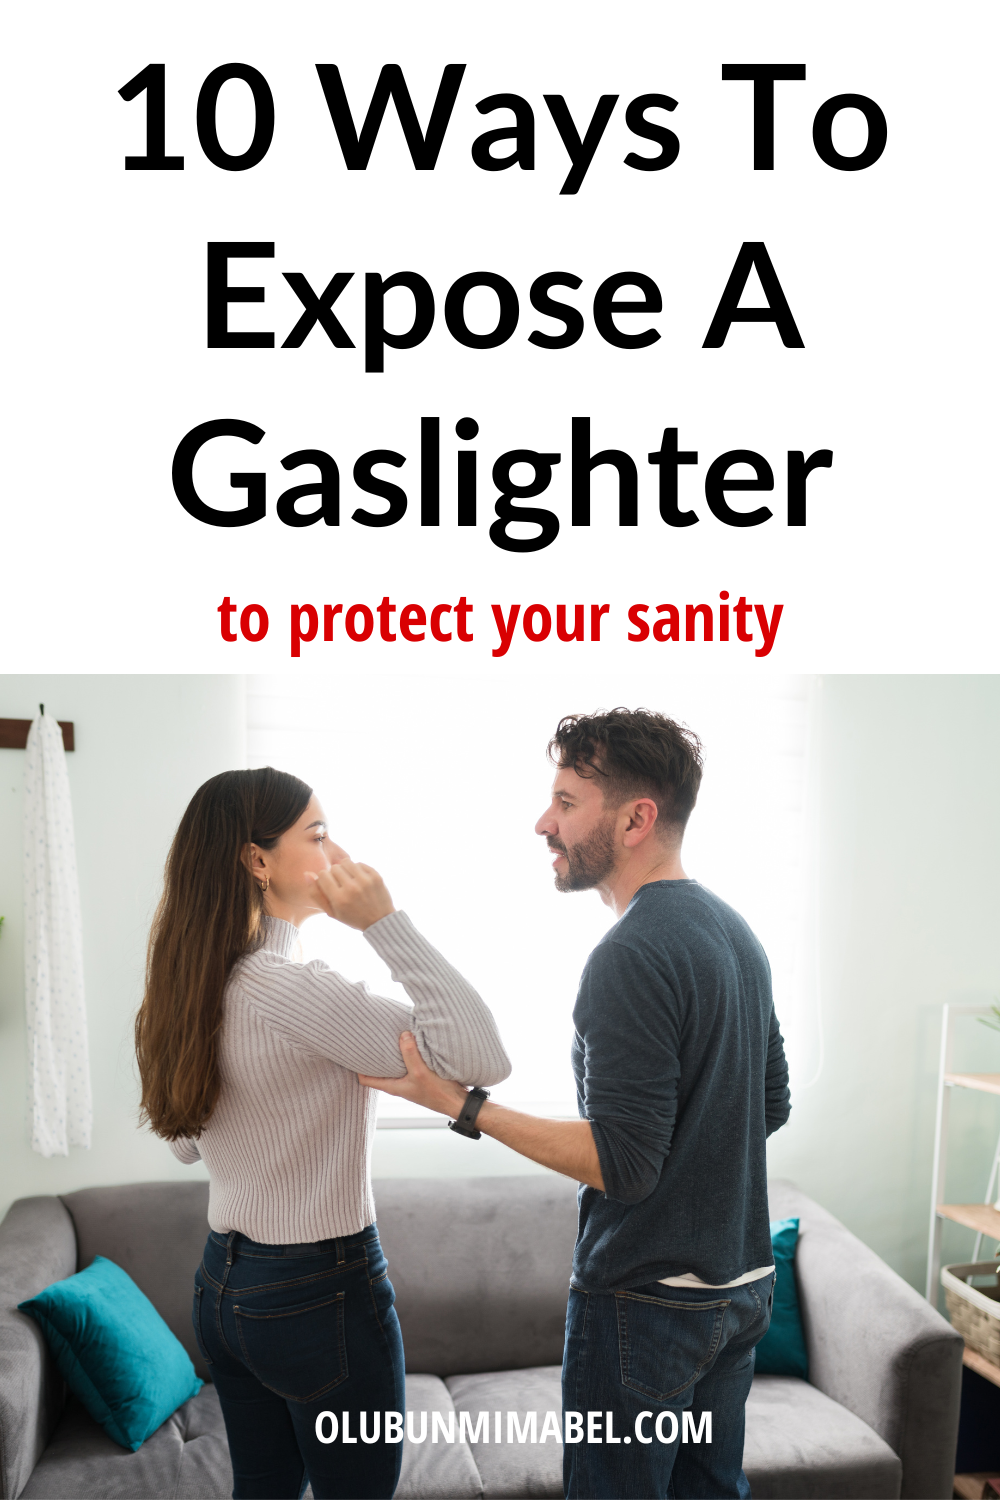 How to Expose a Gaslighter 